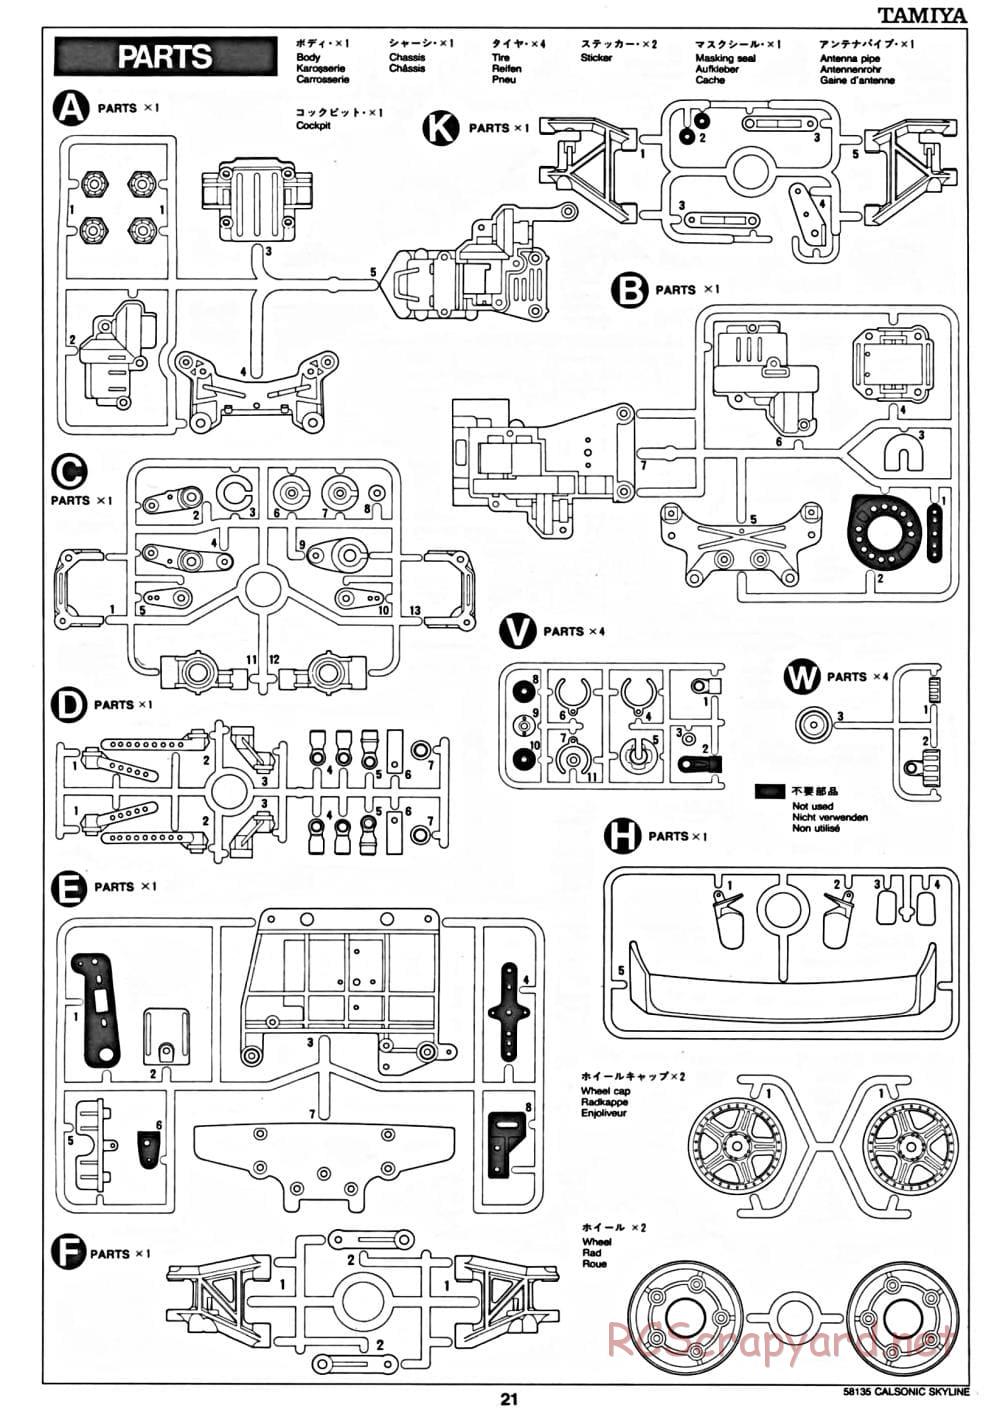 Tamiya - Calsonic Skyline GT-R Gr.A - TA-02 Chassis - Manual - Page 21